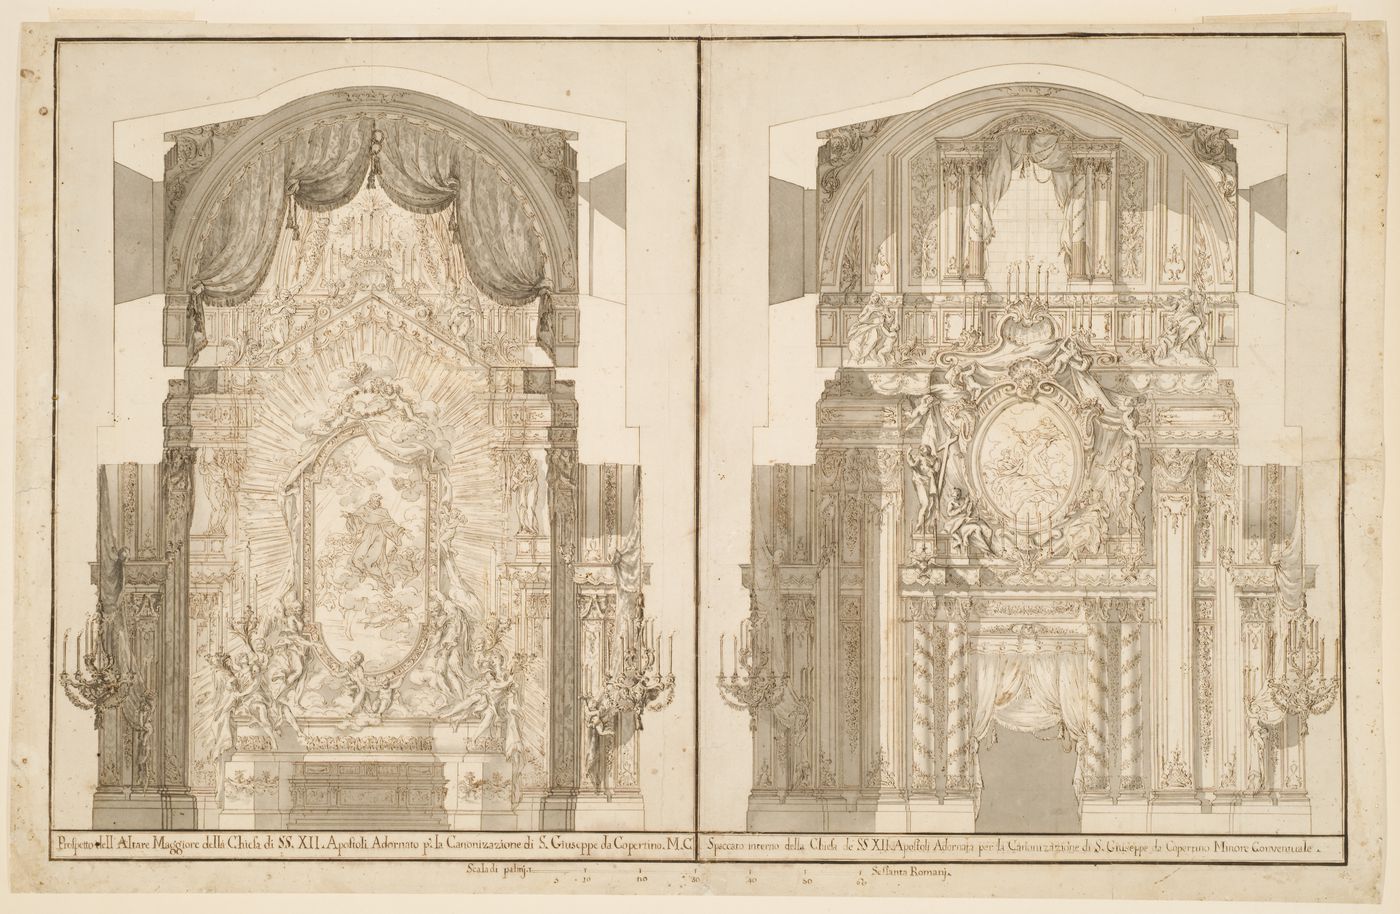 Elevation of the high altar of the Santi Apostoli church, Rome (left), and of the entrance gate of the church (right), decorated on the occasion of the solemn octave celebrated for the canonization of San Giuseppe da Copertino